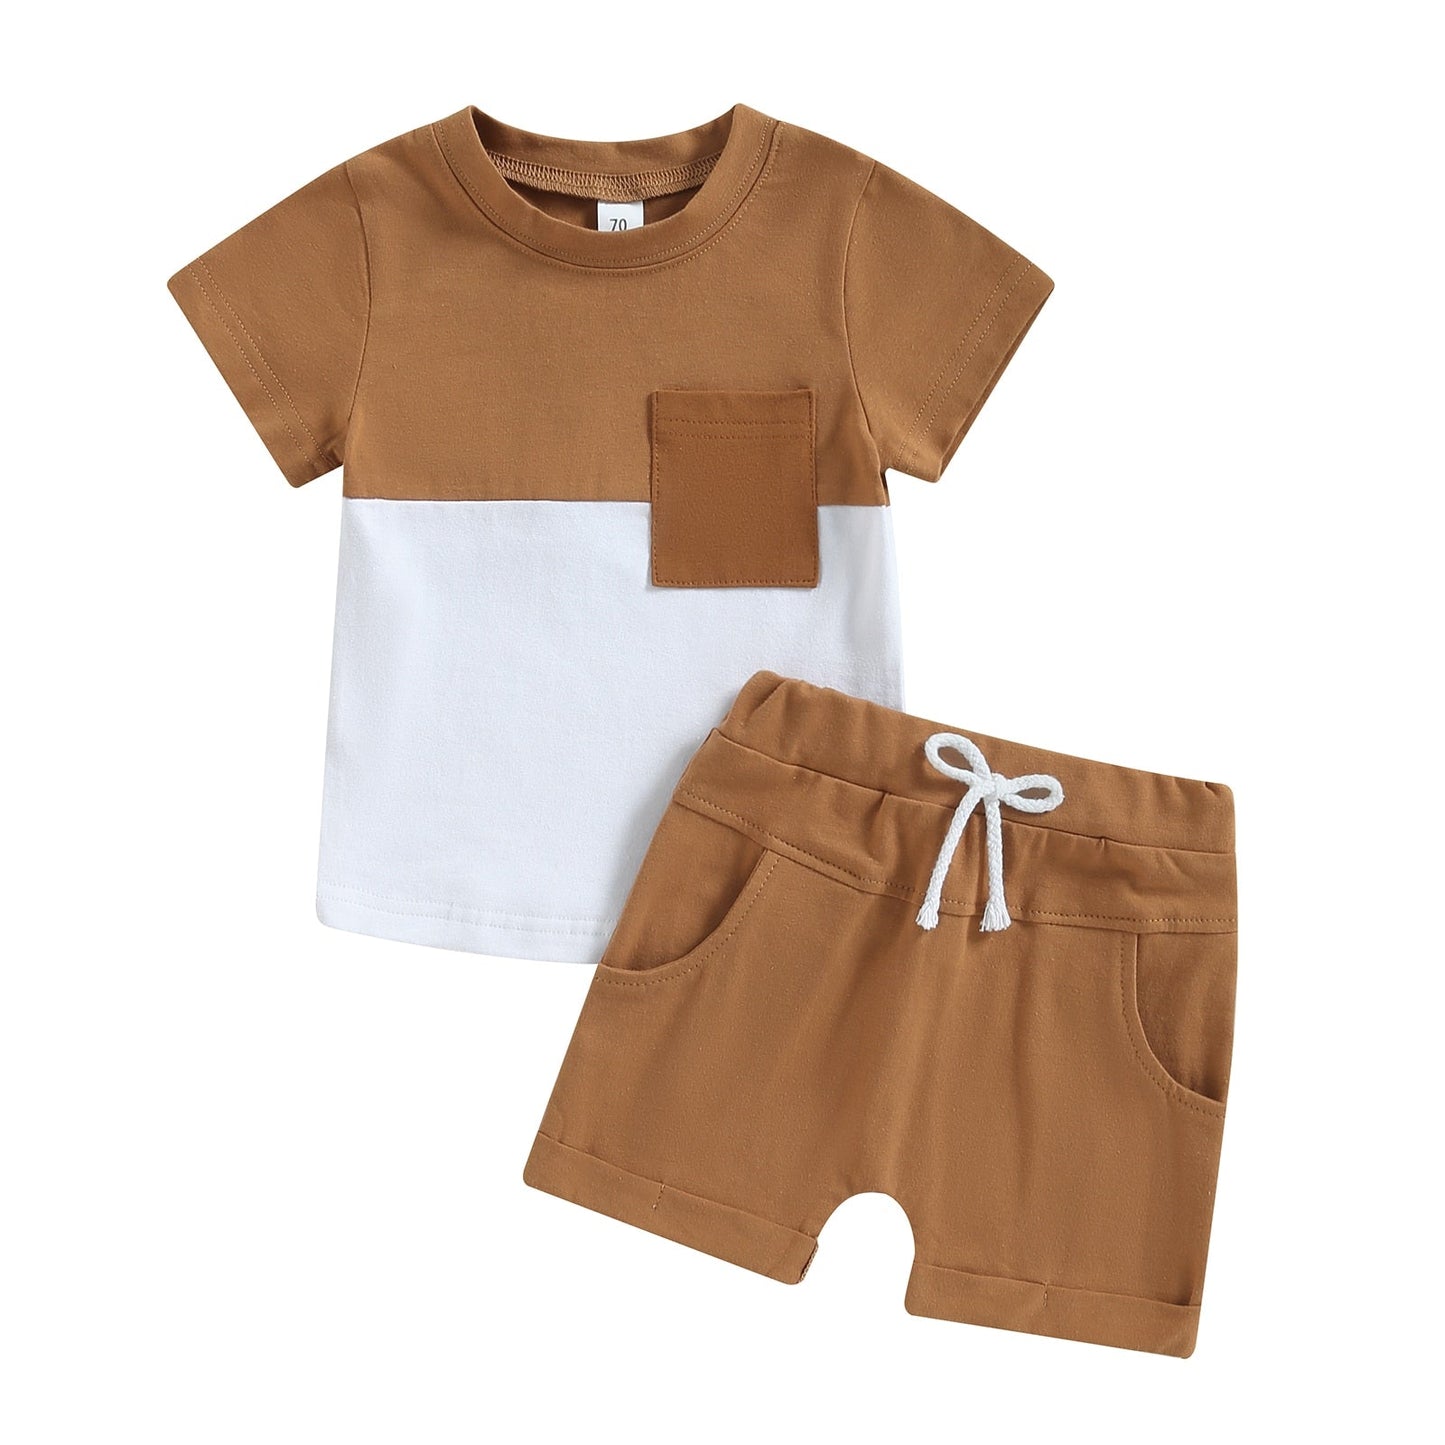 2 Pc Set: 0-3T Toddler Infant Baby Boy Color Block Tee and Shorts Summer Set